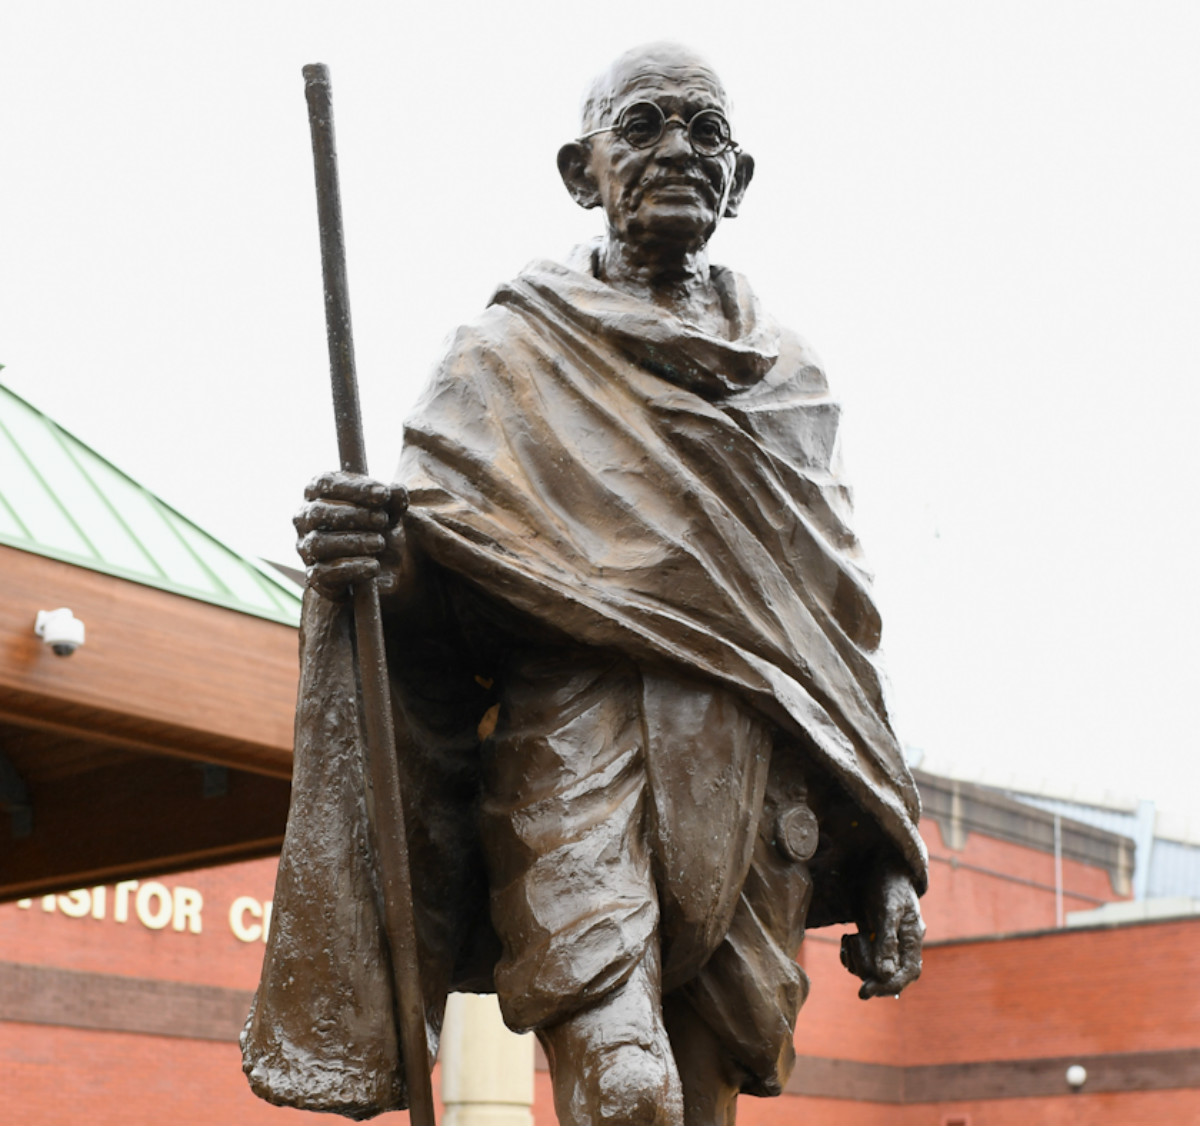 A statue of Gandhi - a short, bald man wearing glasses and carrying a walking stick.